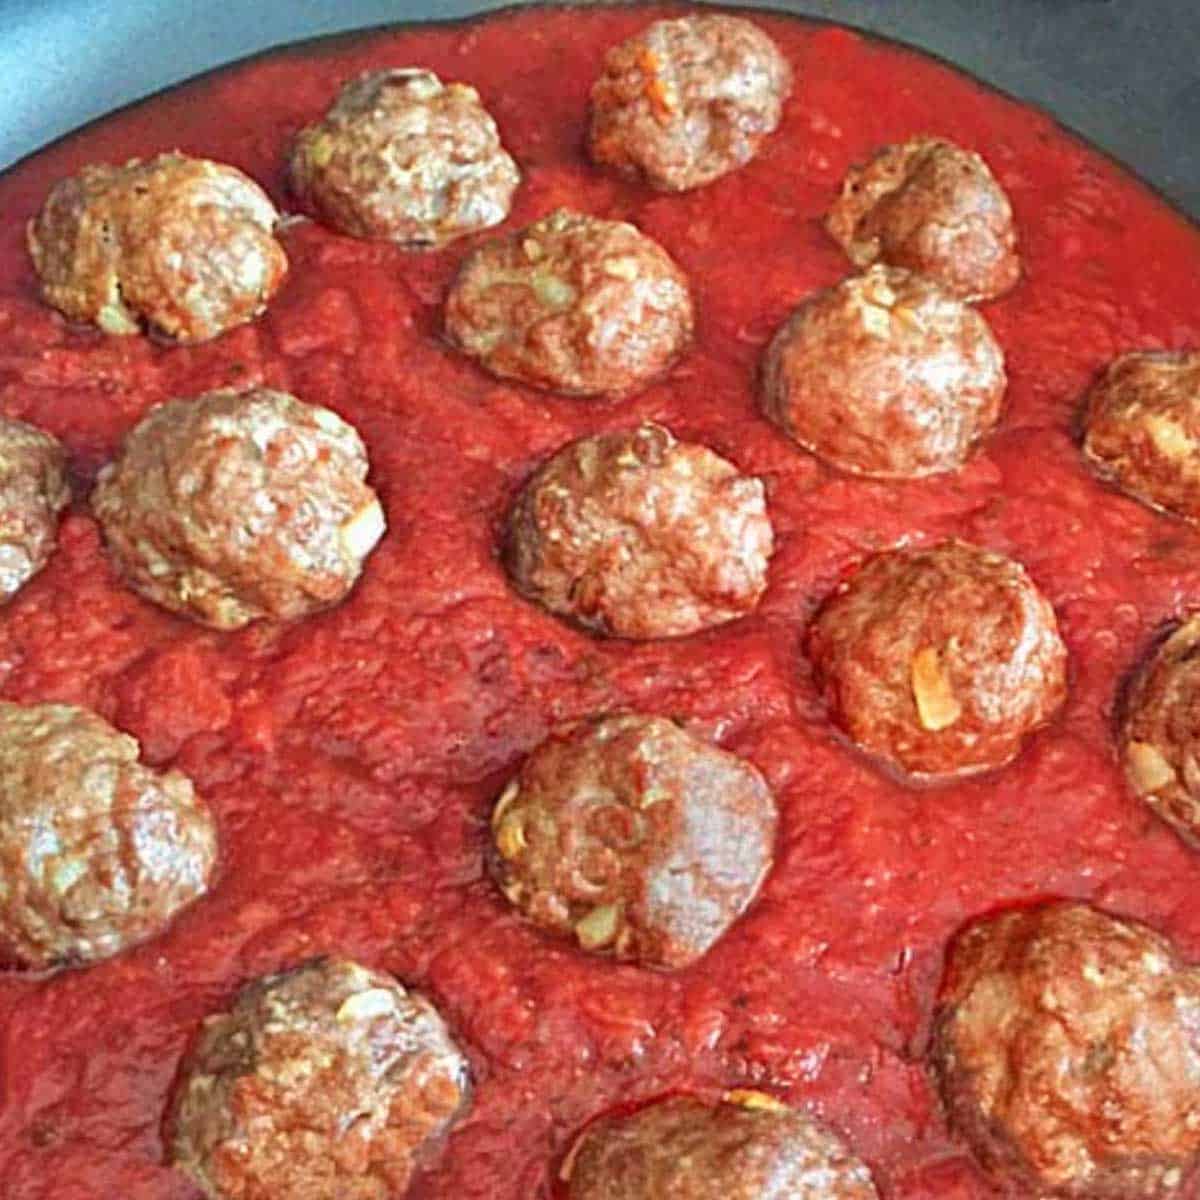 A batch of cooked Italian meatballs in a skillet with spaghetti sauce.